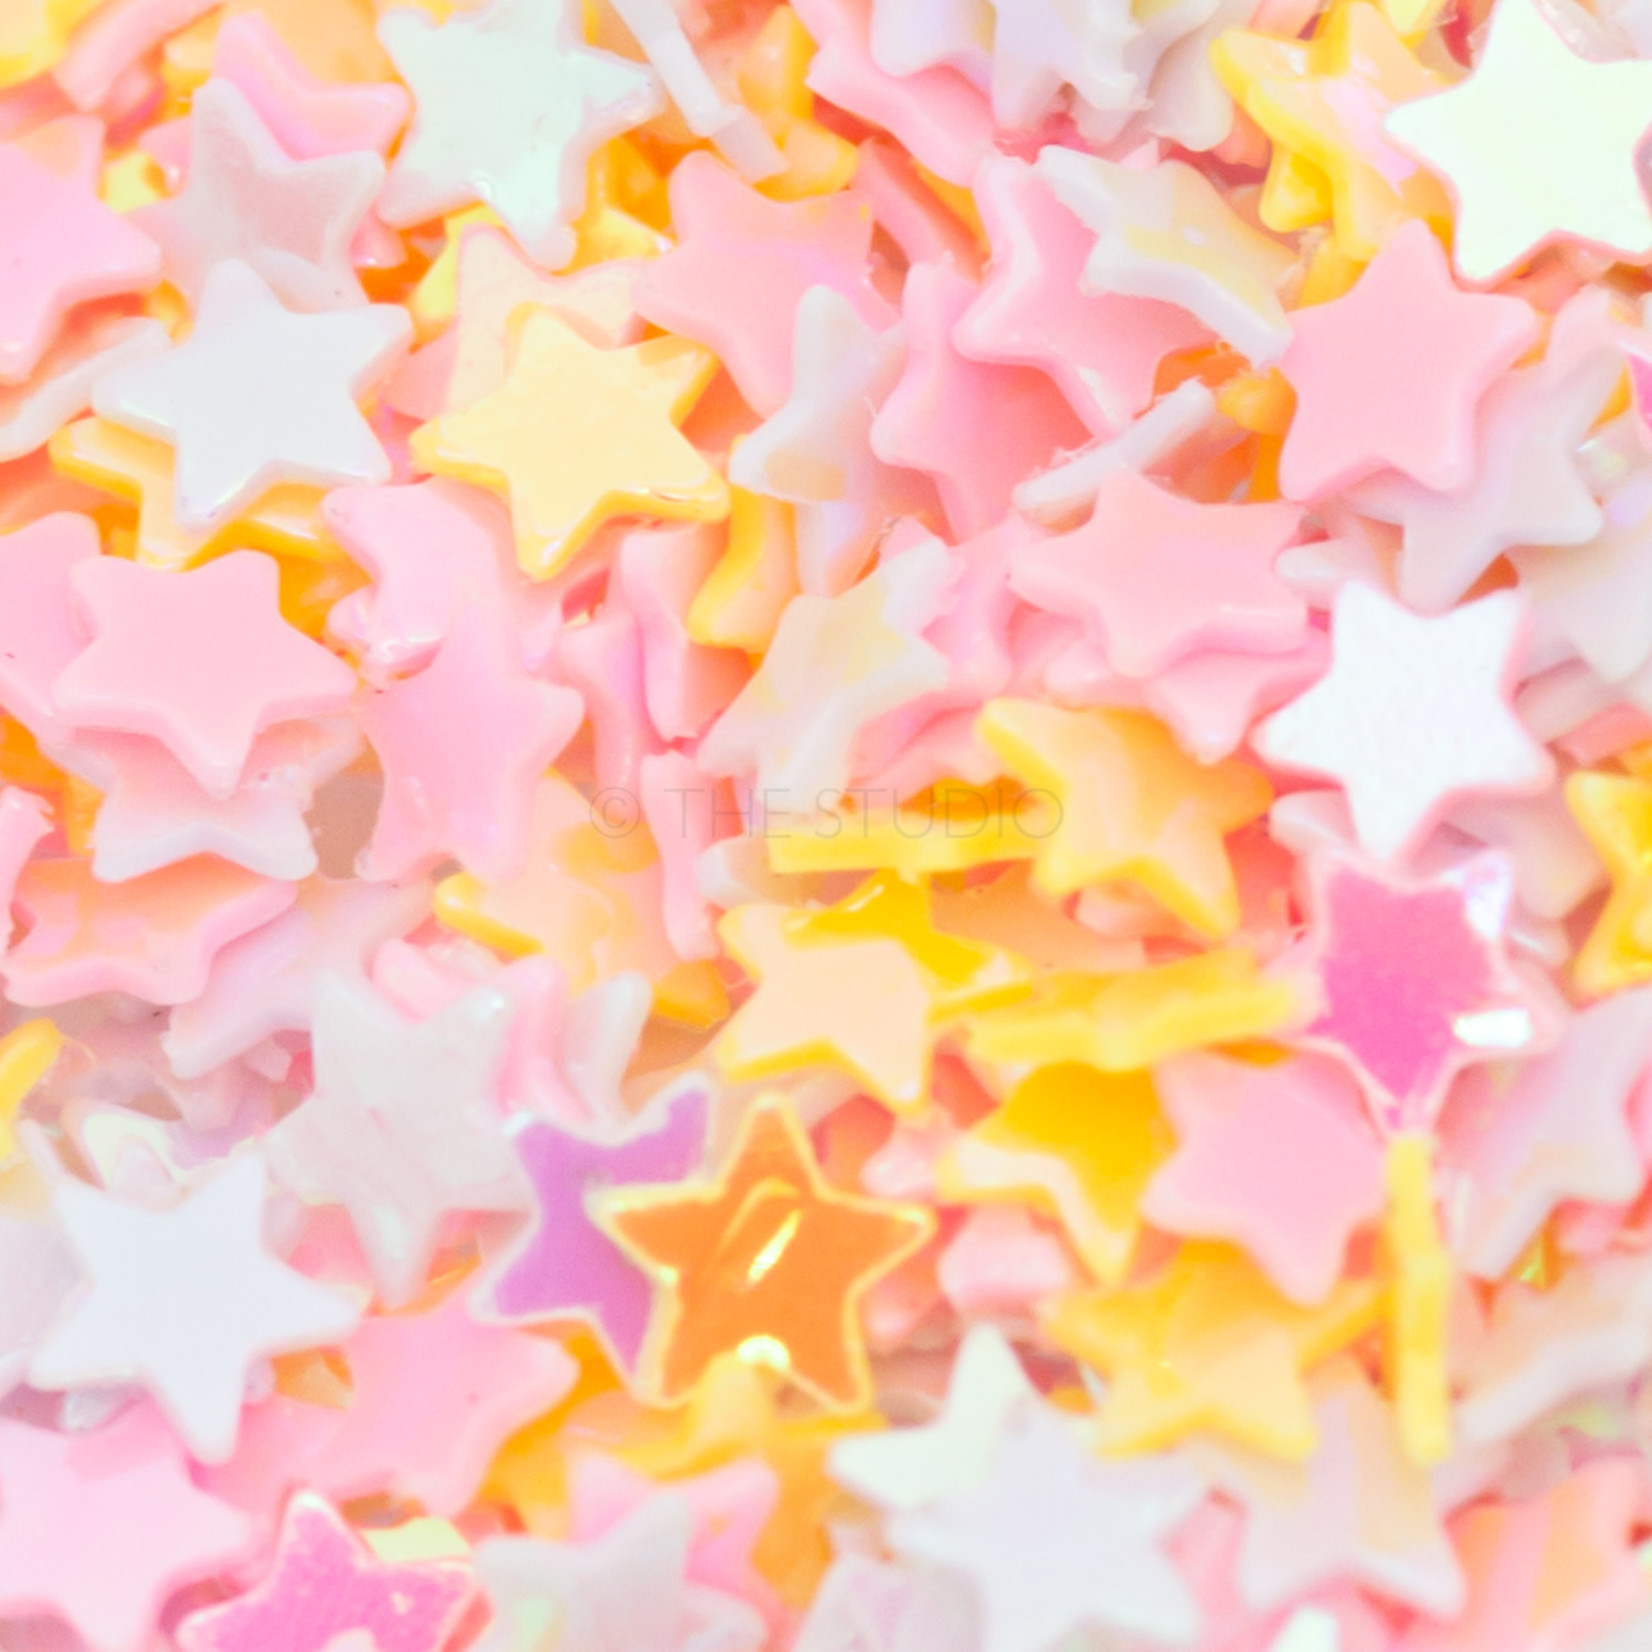 The Studio The Studio - Art Pack #242 - Assorted Yellow and Pink Confetti - 12 pcs